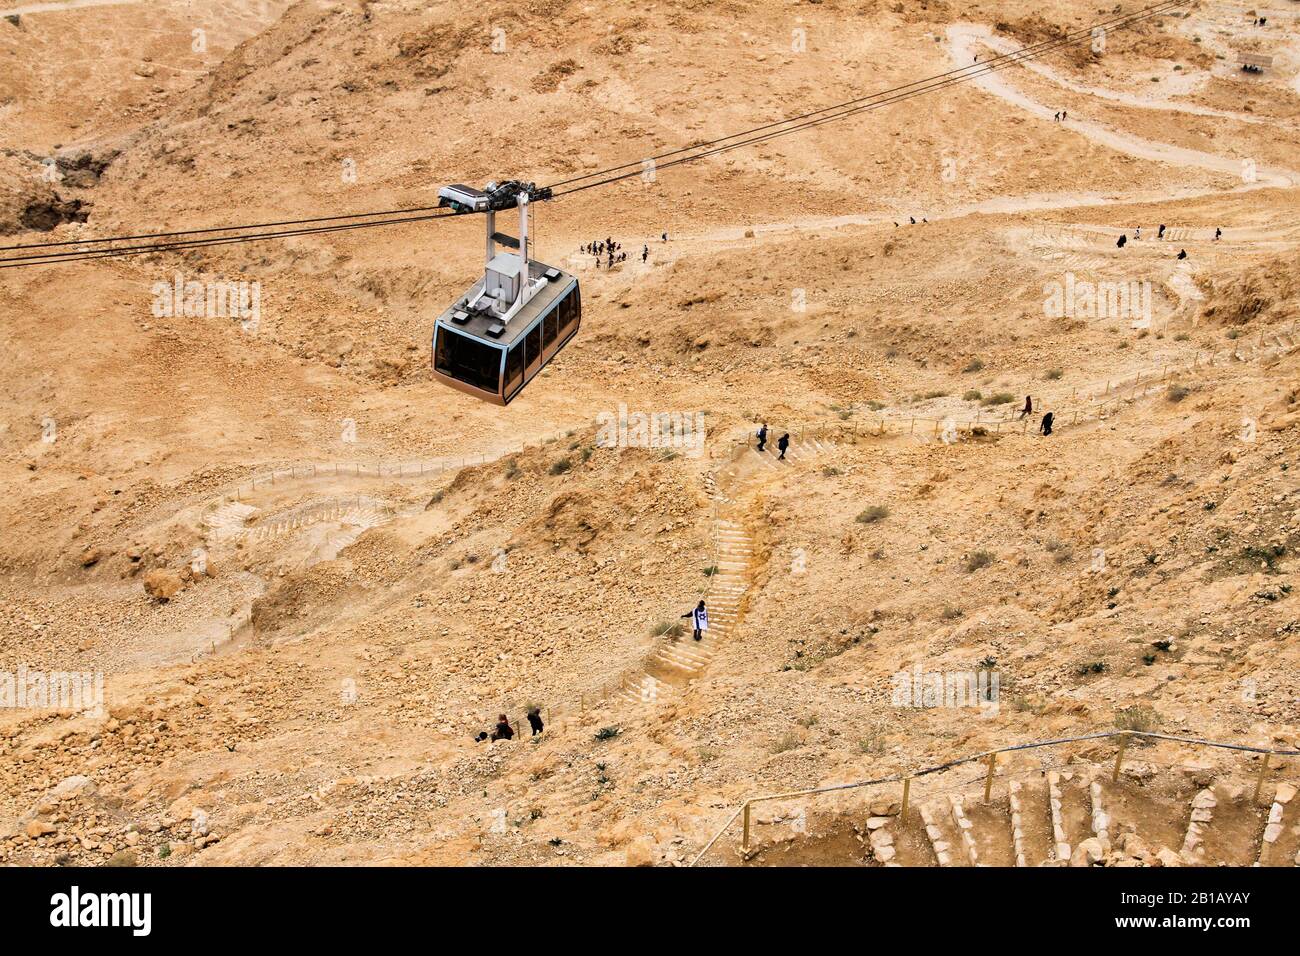 The cable car at Masada National Park in southern Israel descends from the top as people walk down below it. Stock Photo